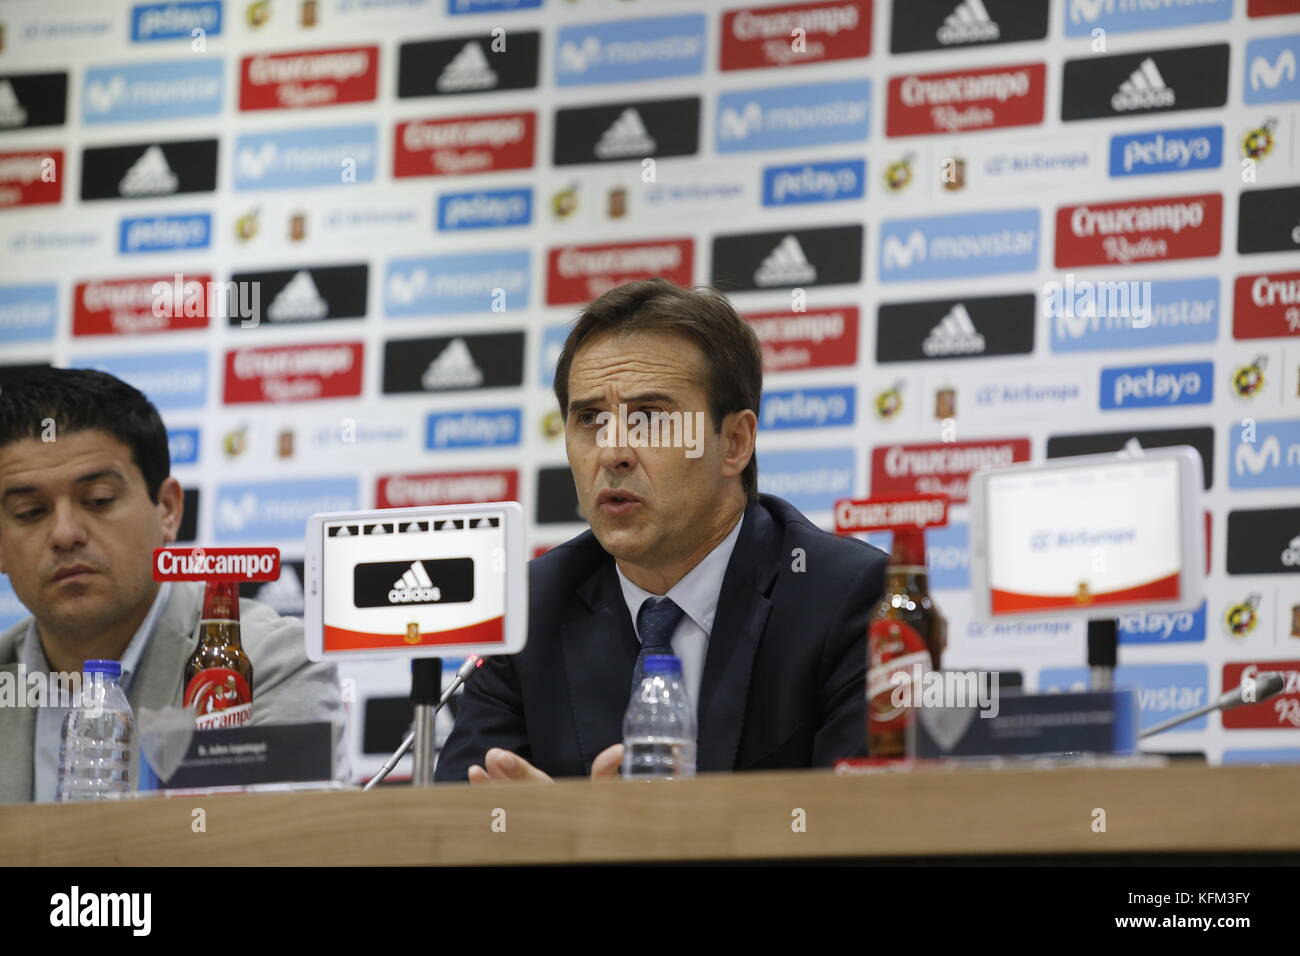 National football coach of Spain, Julen Lopetegui during the presentation of the game against Costa Rica on November 11 in the stadium of la Rosaleda. 30/10/2017 Credit: Gtres Información más Comuniación on line, S.L./Alamy Live News Stock Photo